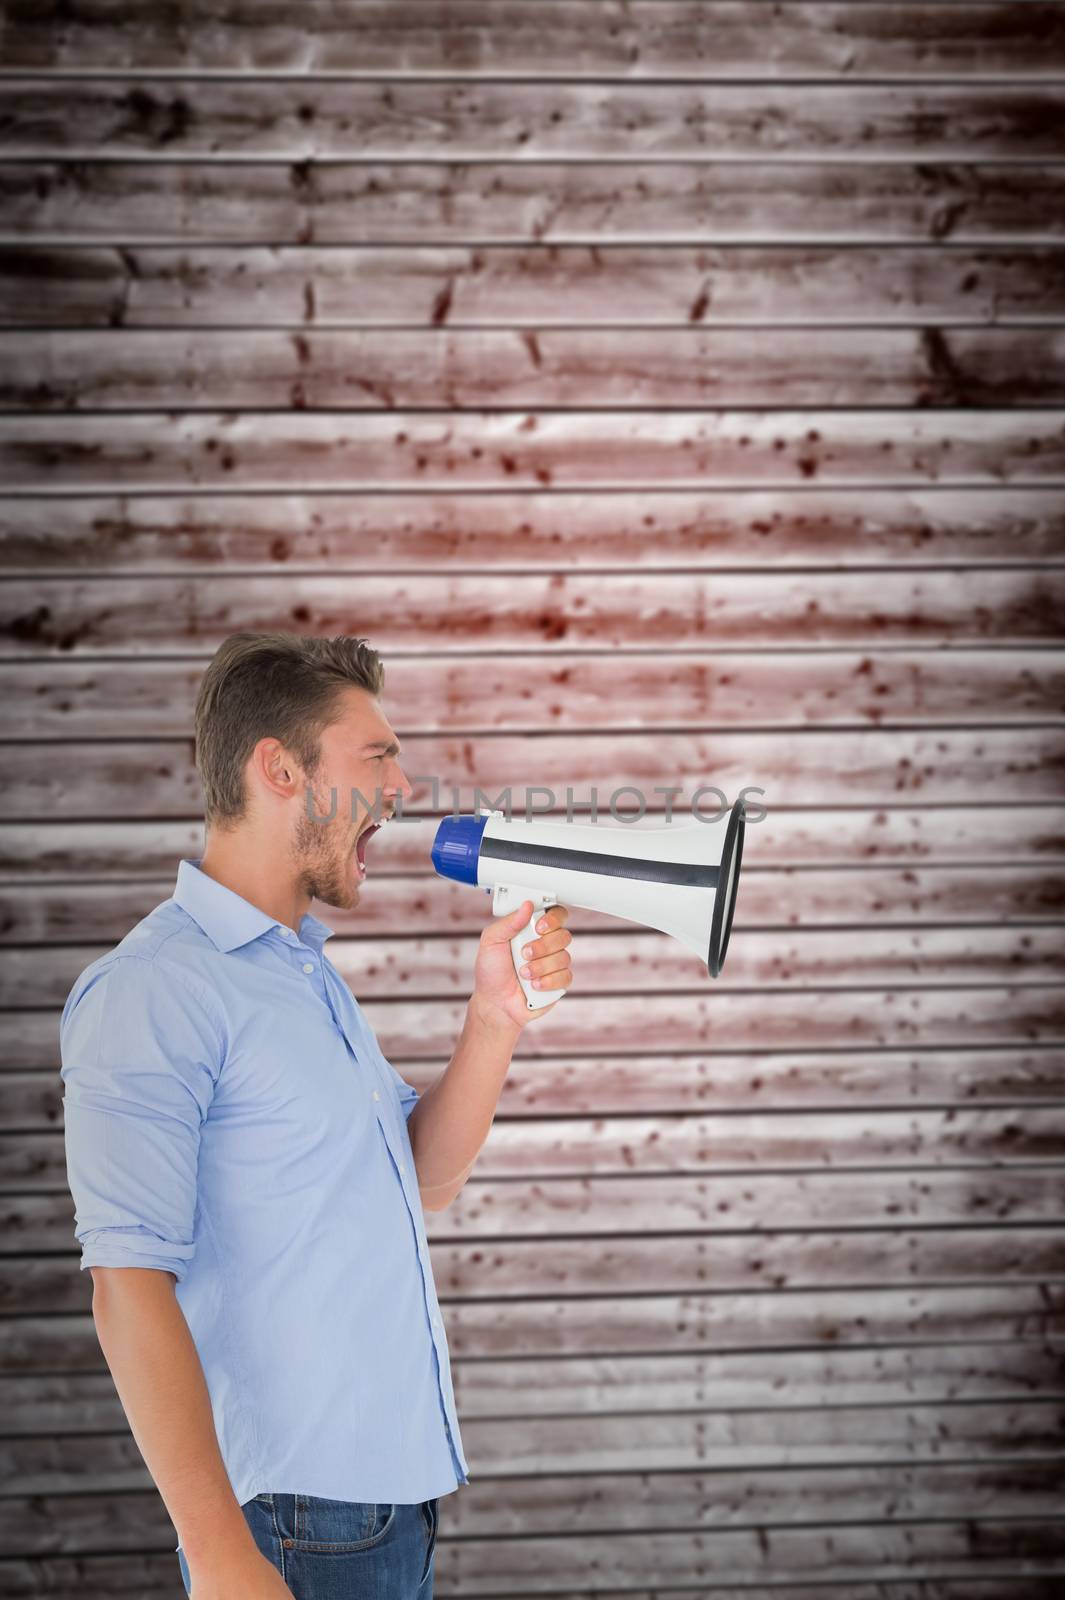 Composite image of angry man shouting through megaphone by Wavebreakmedia